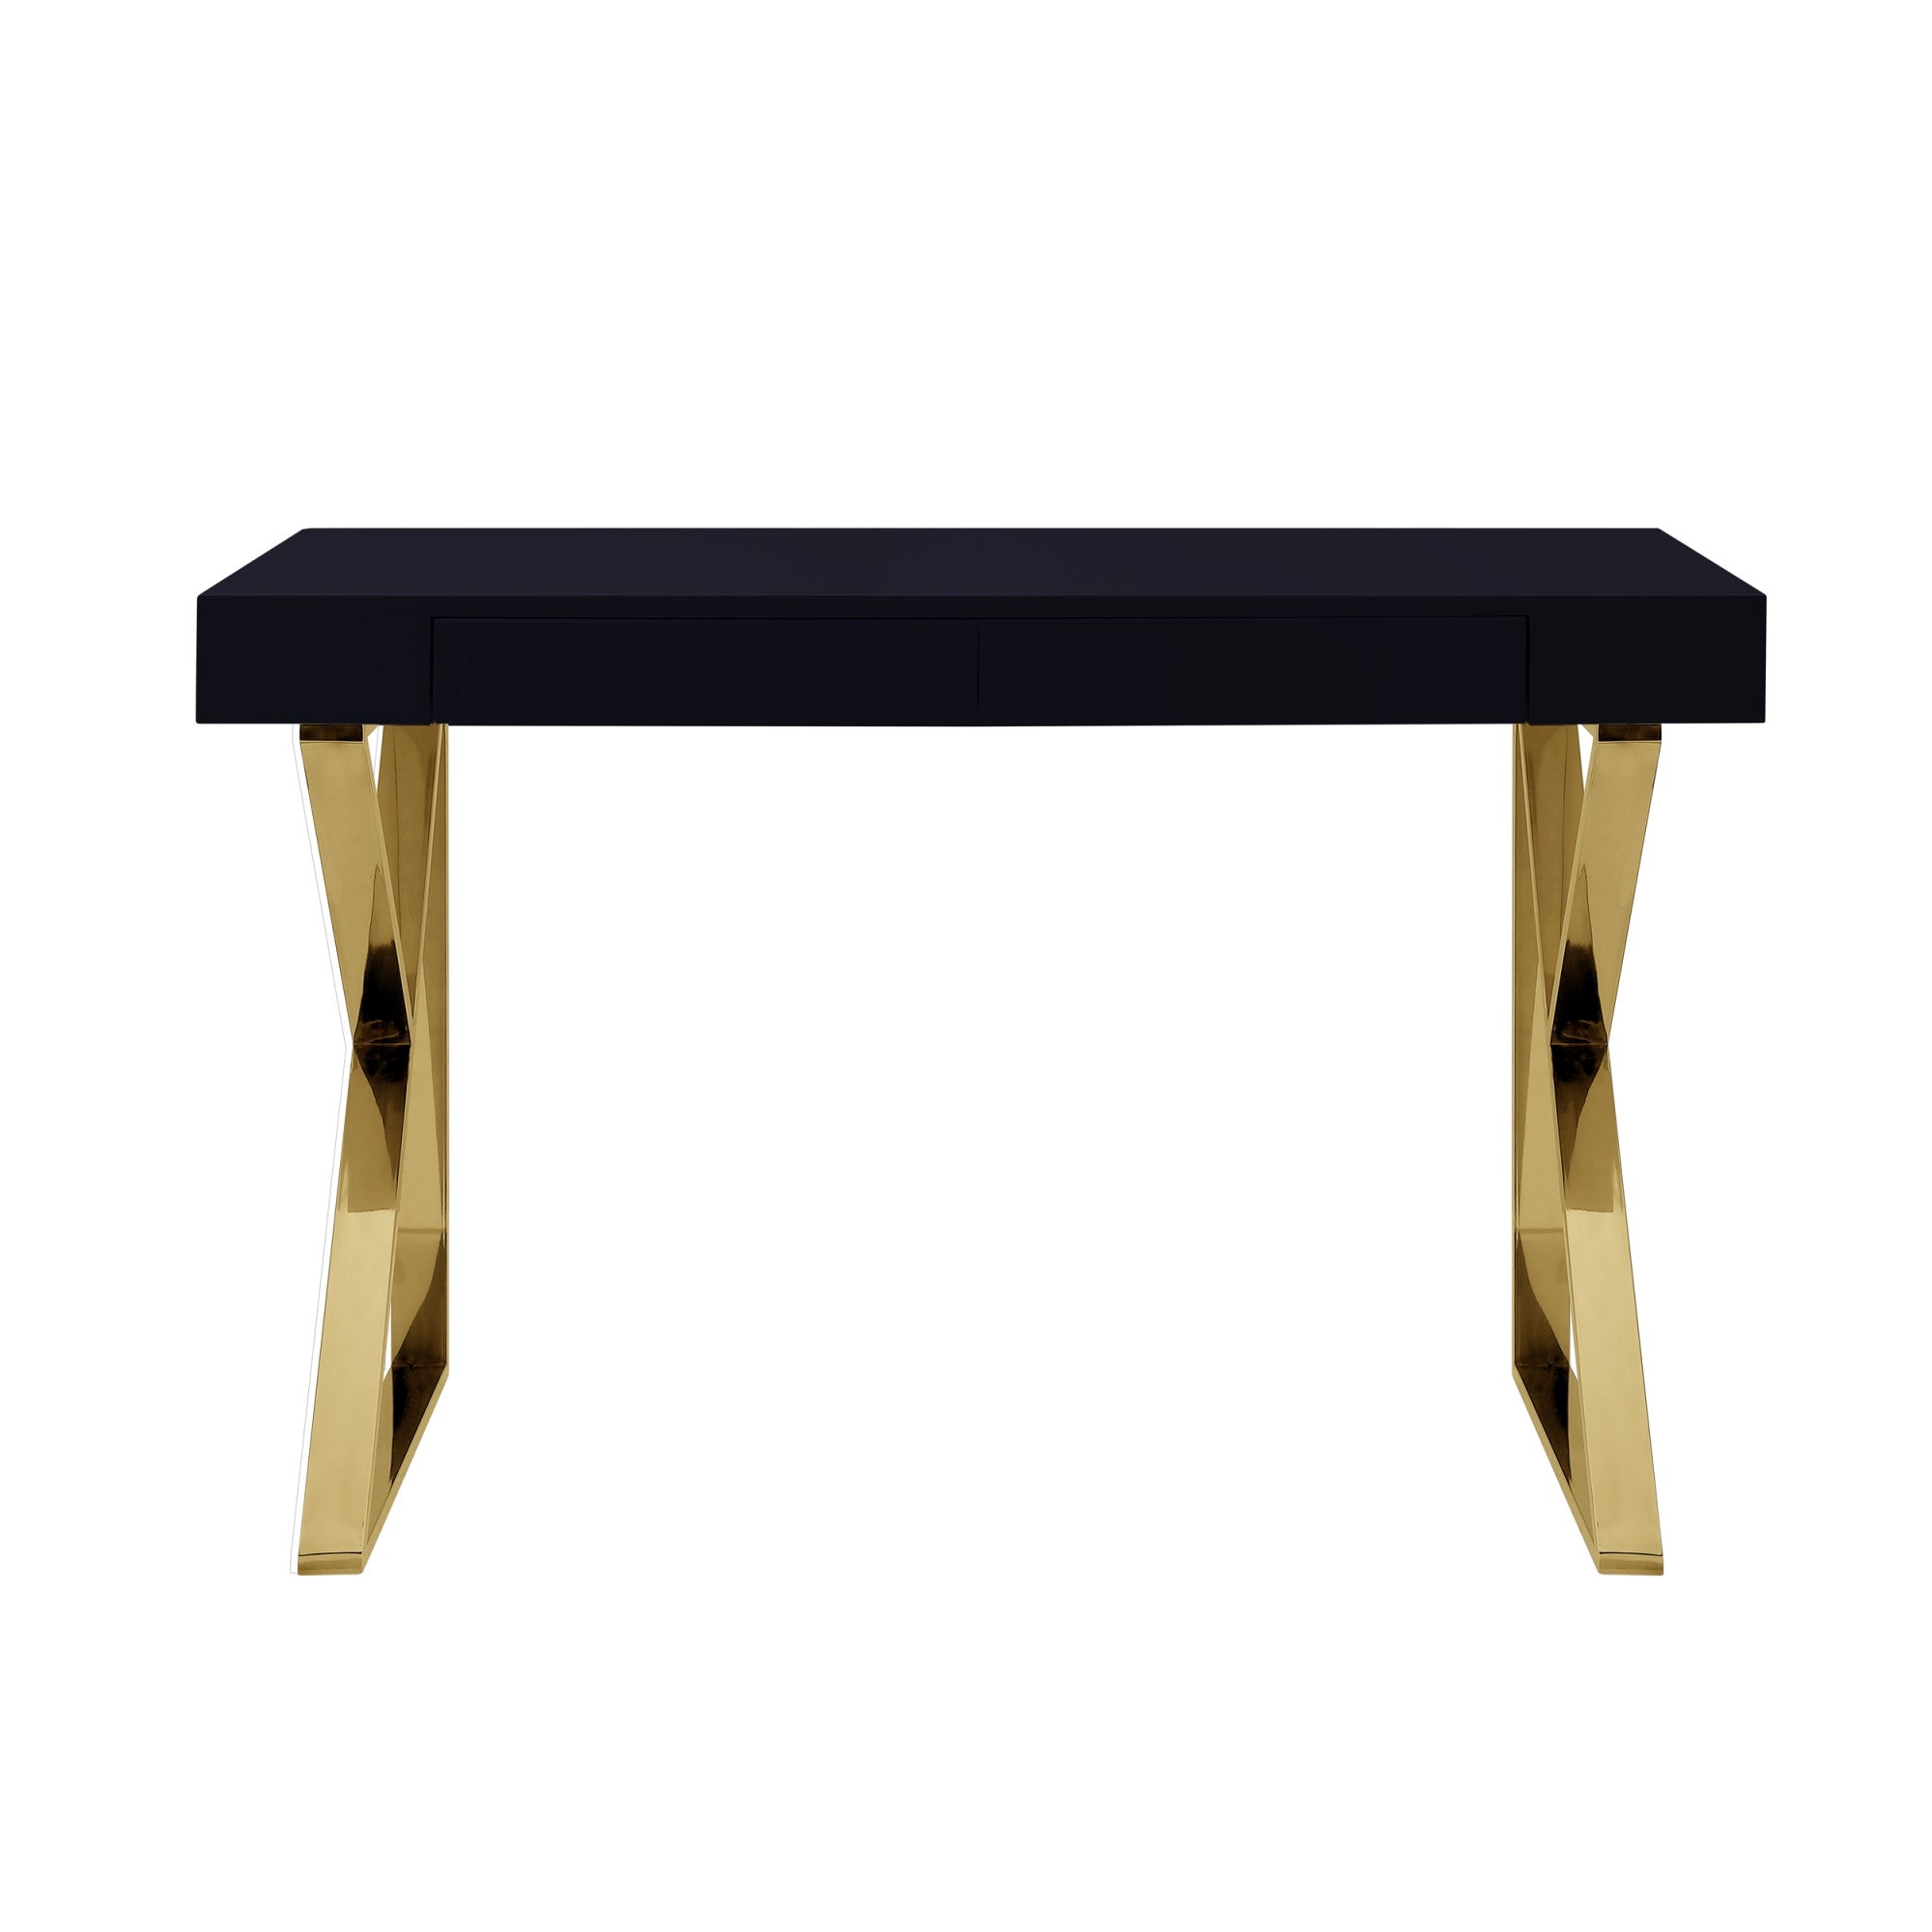 48" Black and Gold Writing Desk With Two Drawers